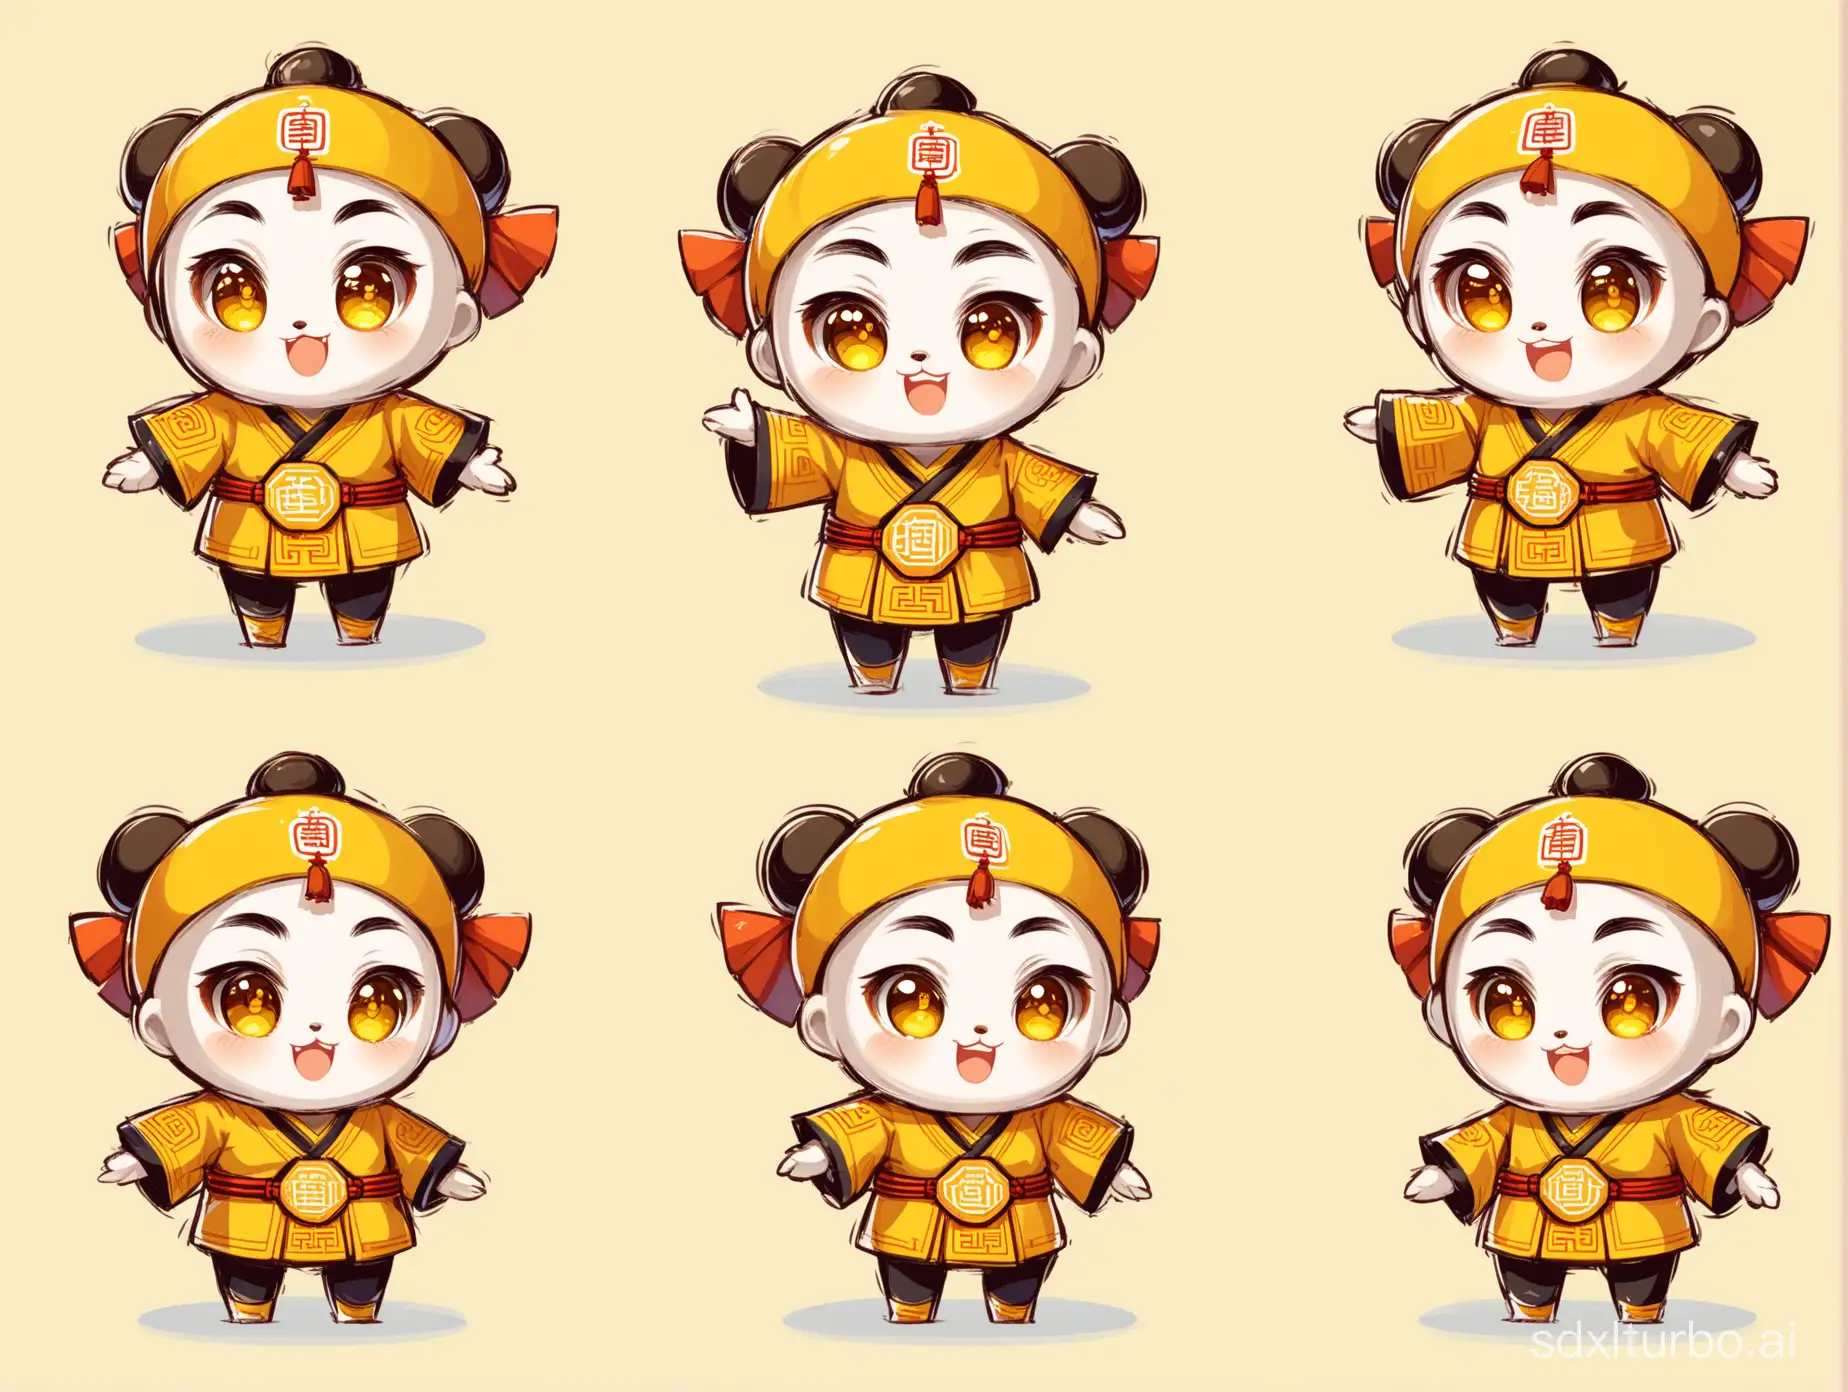 Virtual cartoon mascot, four views presentation, front, side, back, cartoon character design, the mascot of Sanbei culture in Ningbo, Zhejiang, China, humanoid image, meta-universe environment, elementary school campus mascot, symbolizing the eyes of wisdom, mathematical elements, campus culture, dream education, dream-chasing theme.